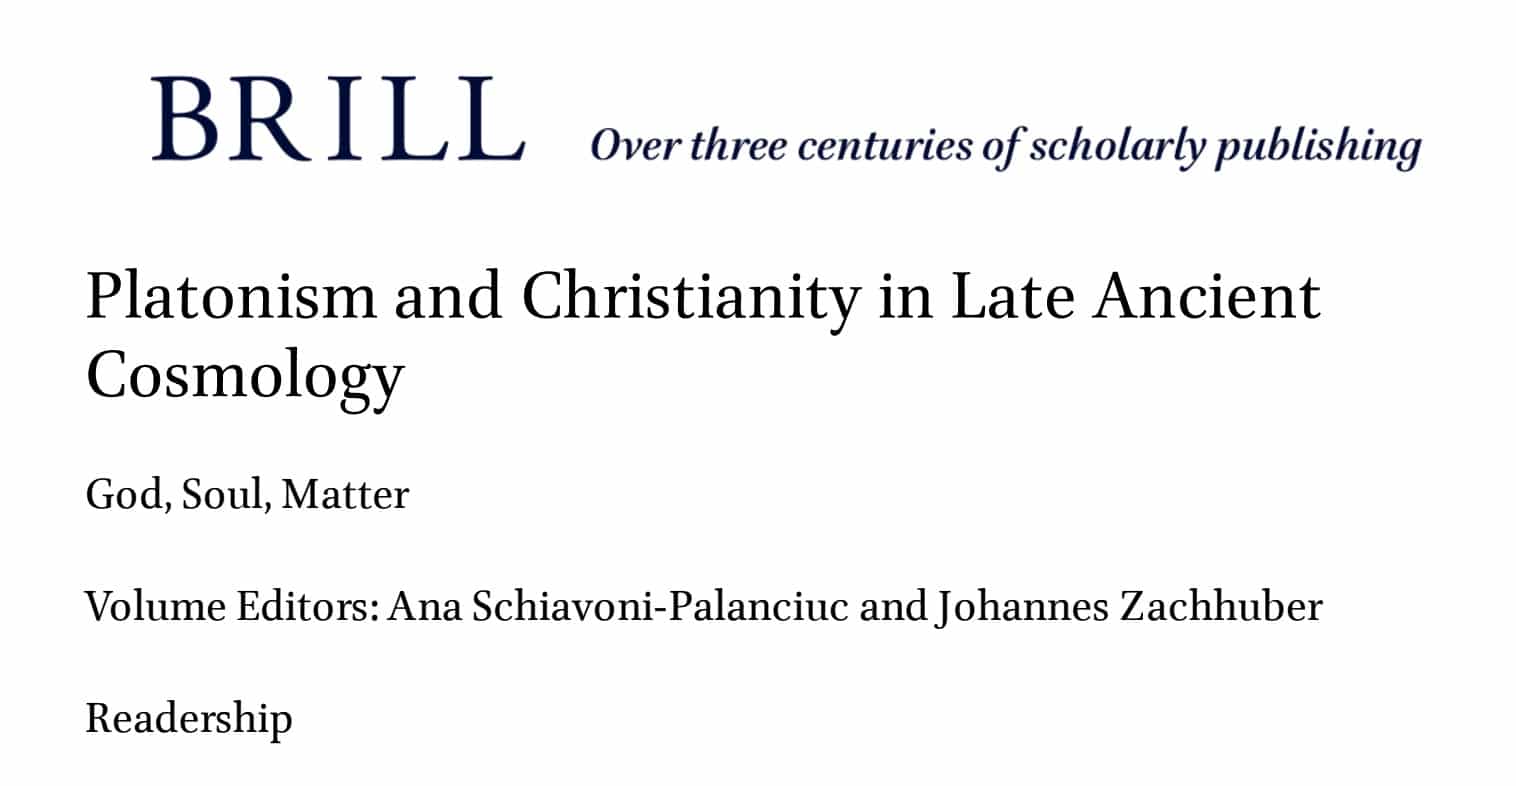 Parution du livre « platonism and christianity in late ancient cosmology »￼